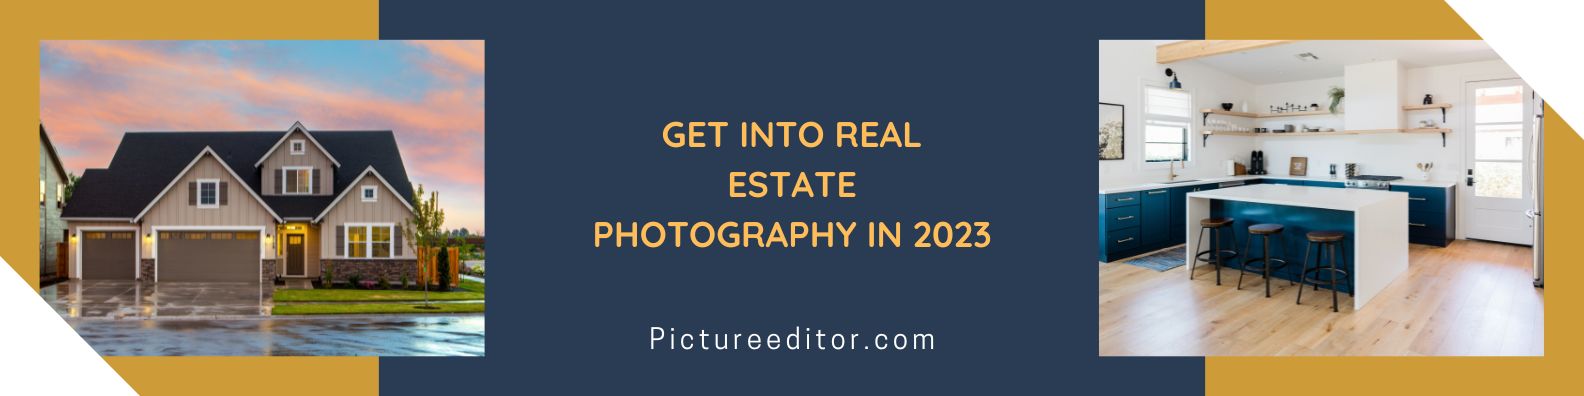 Get Into Real Estate Photography in 2023